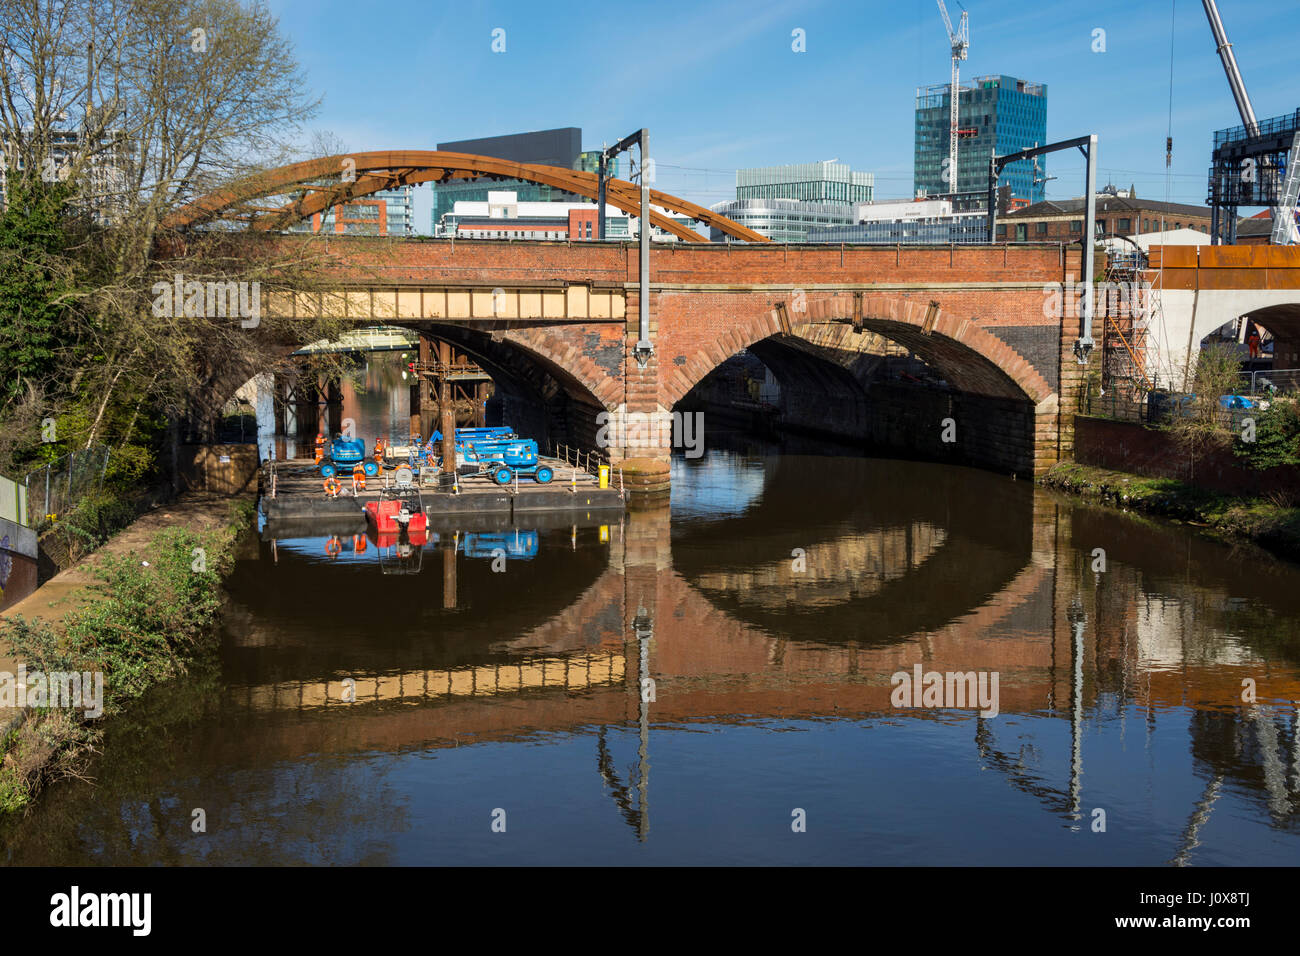 The arch for the river Irwell bridge, for the new Ordsall Chord rail link, behind a Victorian railway viaduct, Salford, Manchester, England, UK Stock Photo